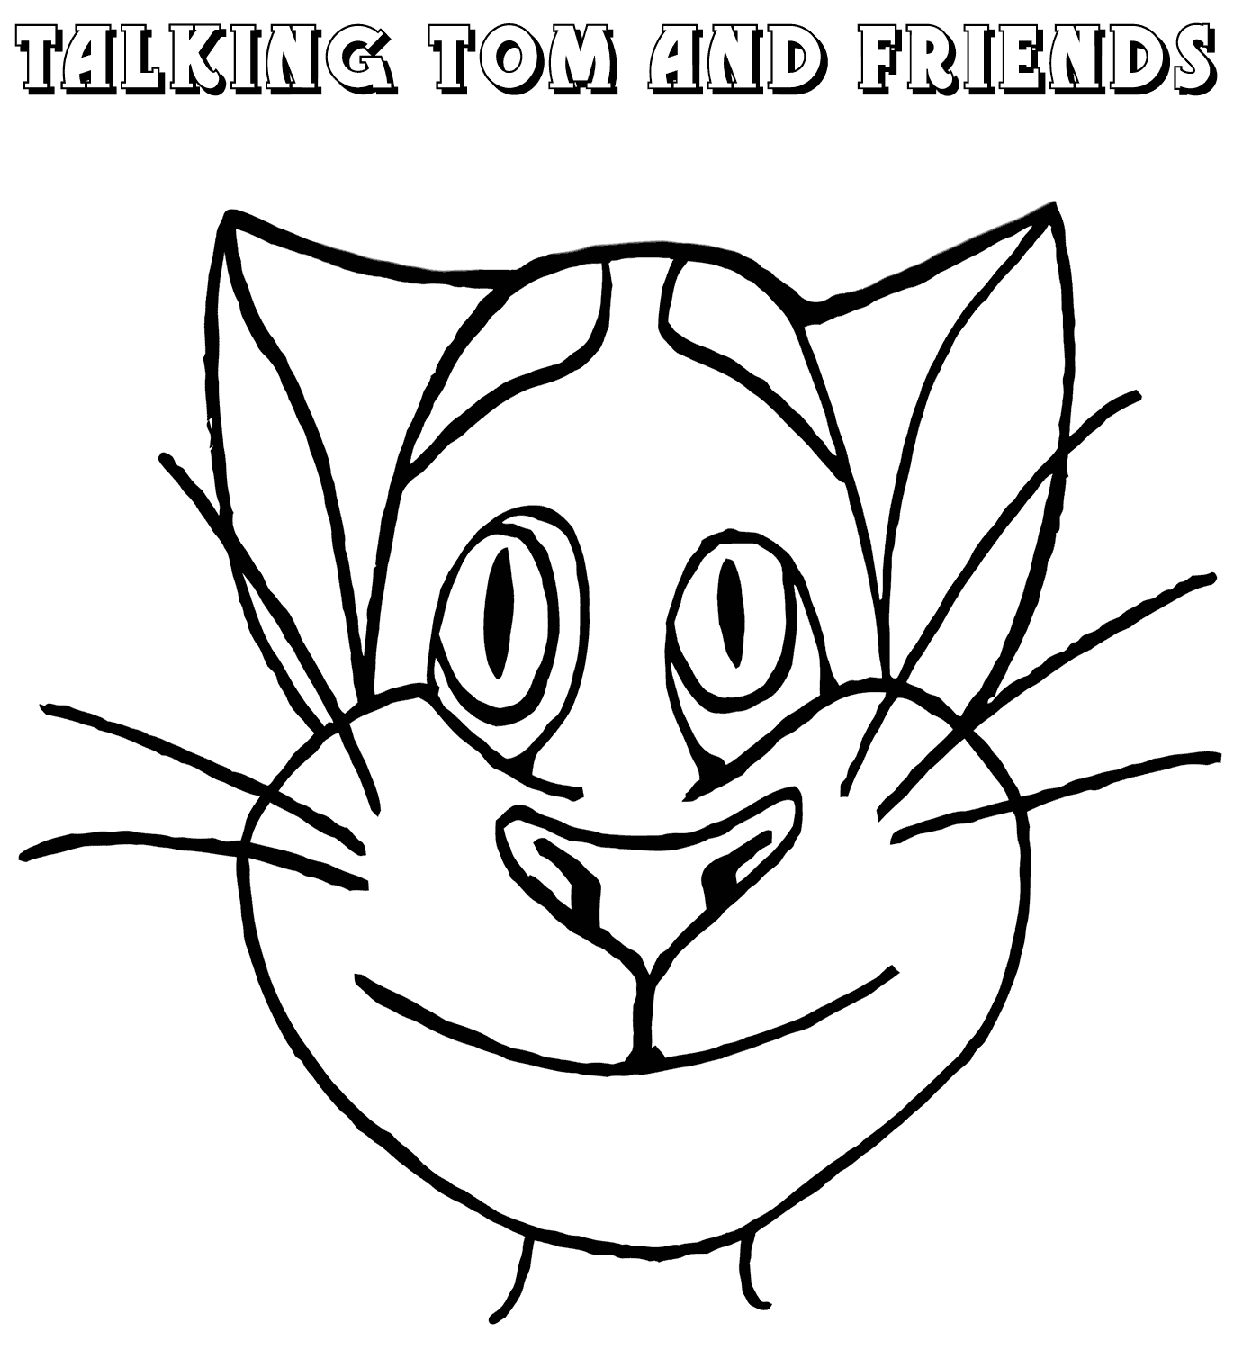 Hank The Talking Dog Coloring Page - Free Printable Coloring Pages for Kids